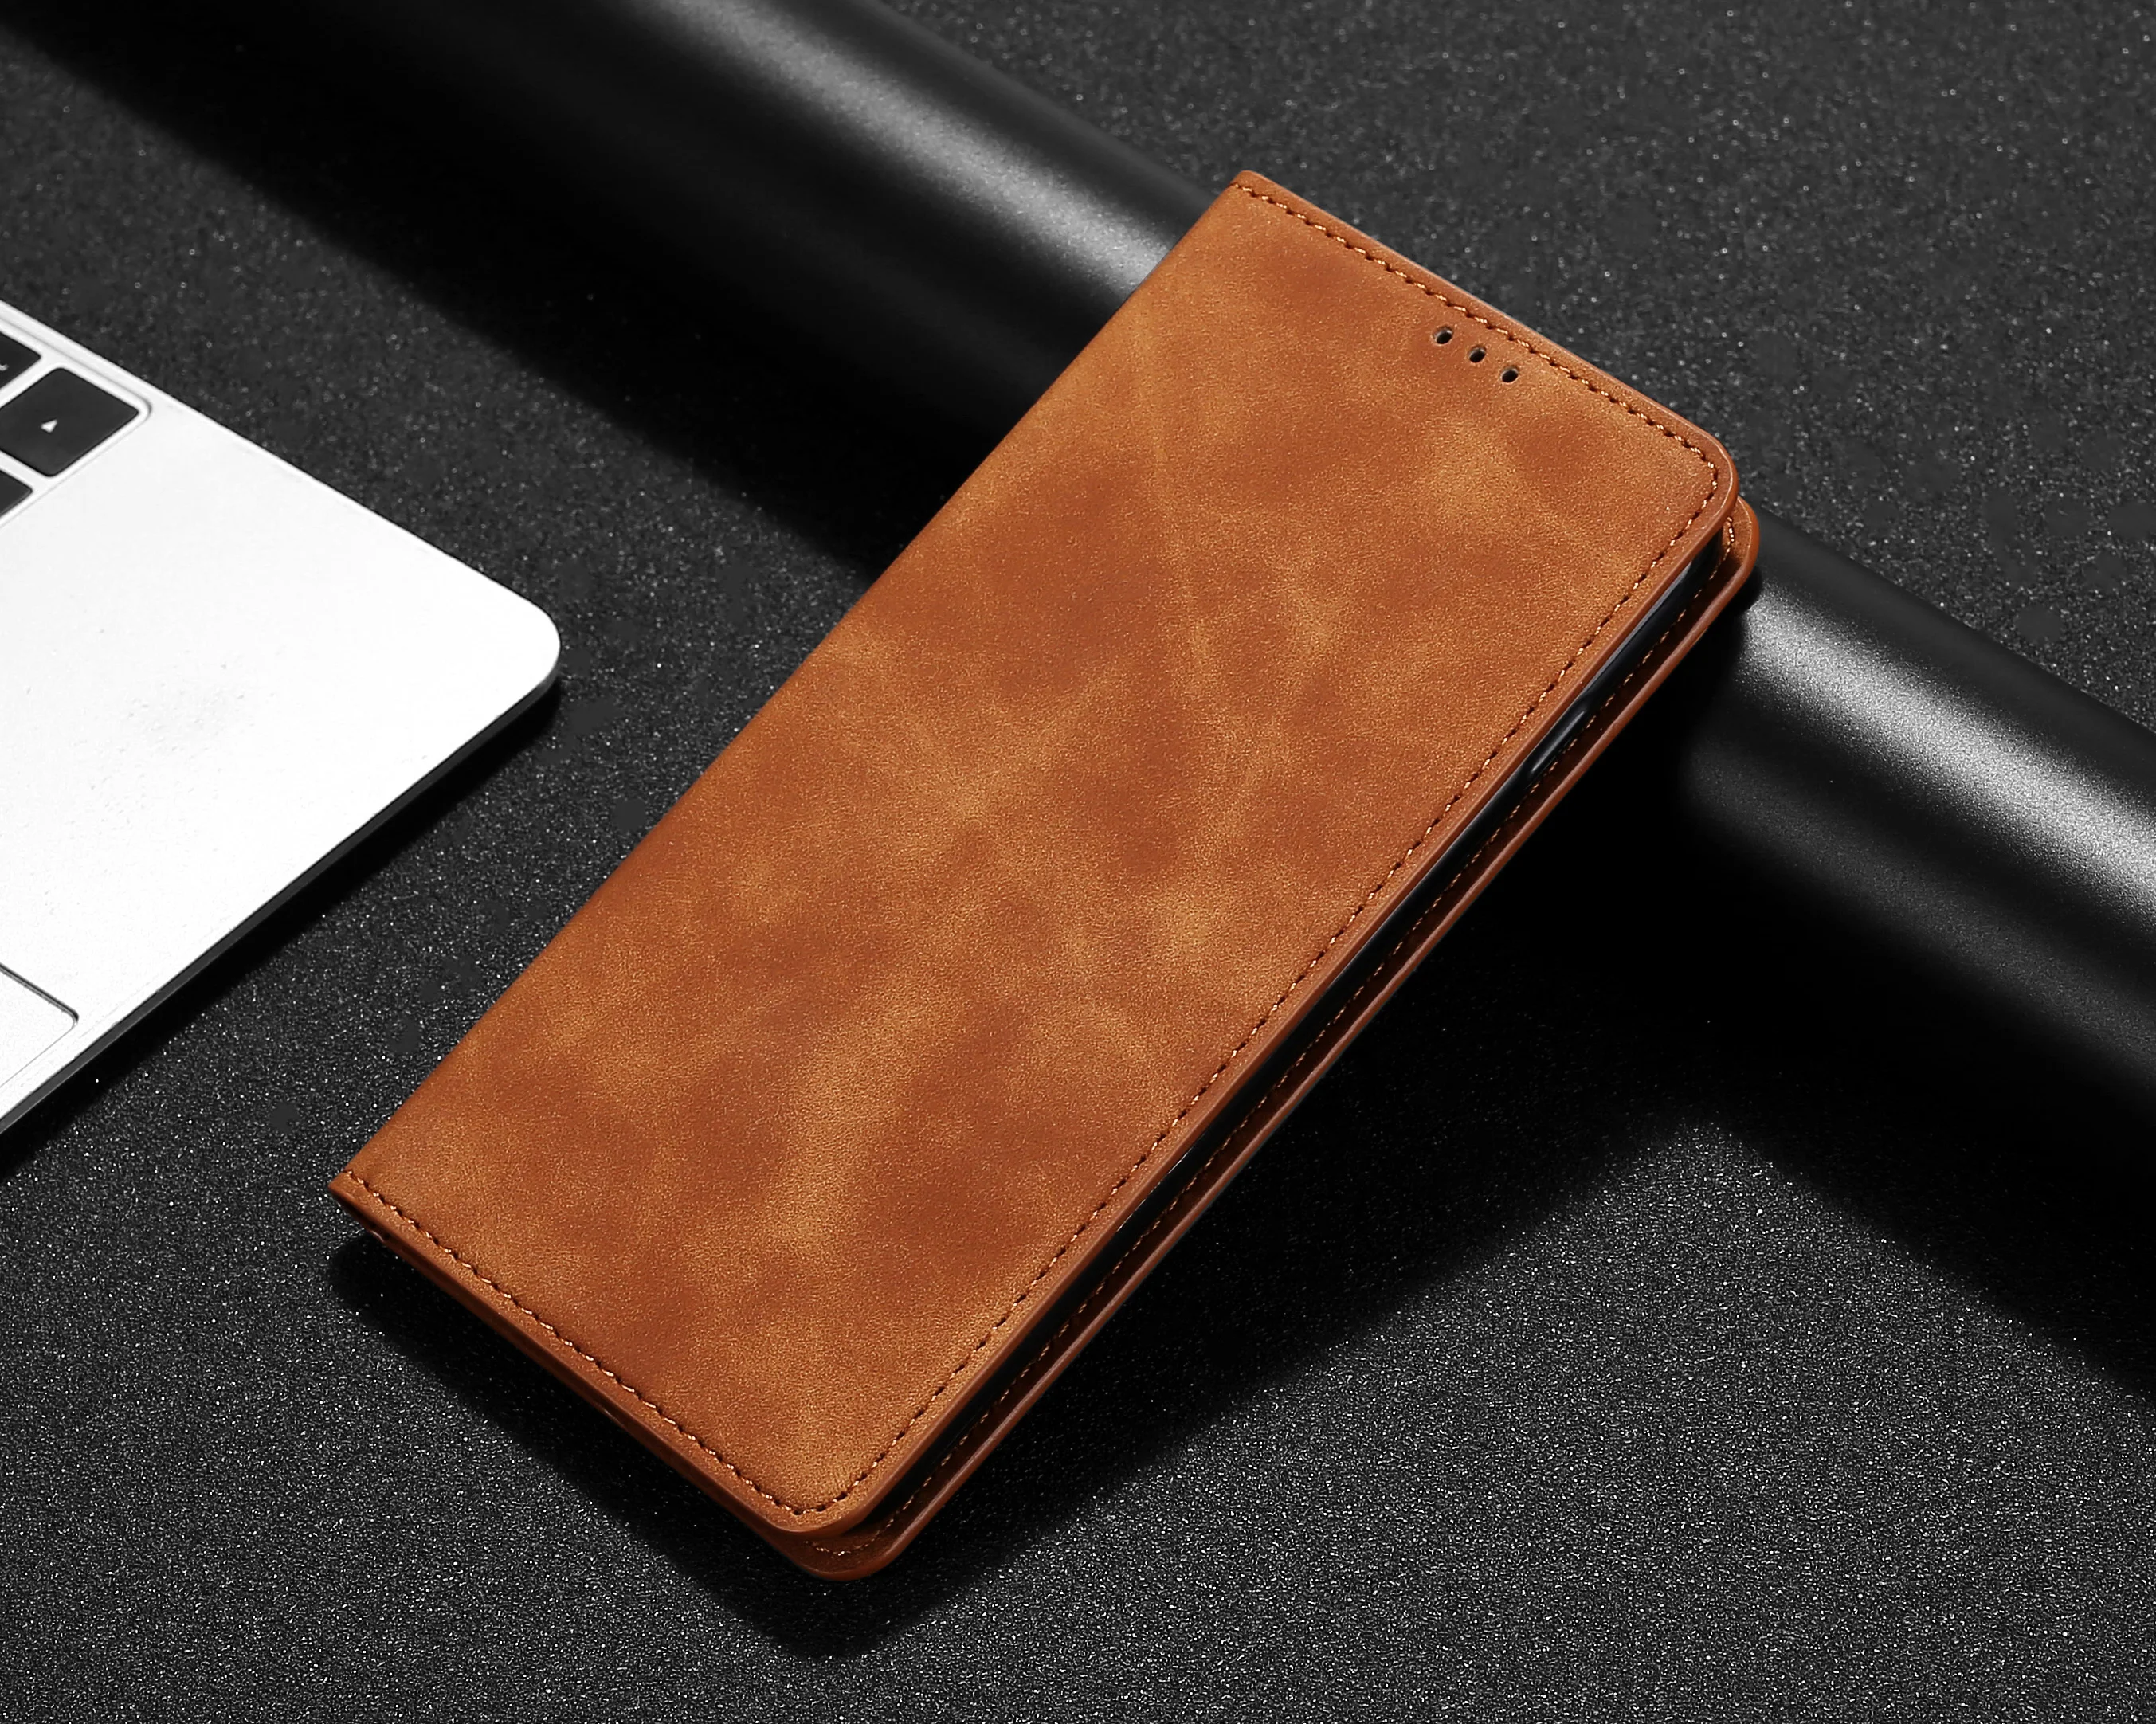 case for xiaomi Leather Flip Case For Xiaomi Redmi 8 6 6A 5 Plus 4A 4X Note 5A 4 5 7 6 8 Pro 8T 3S Go Mi A3 9T 9 Lite For Redmi 8A 8 7A 6A Cover xiaomi leather case custom